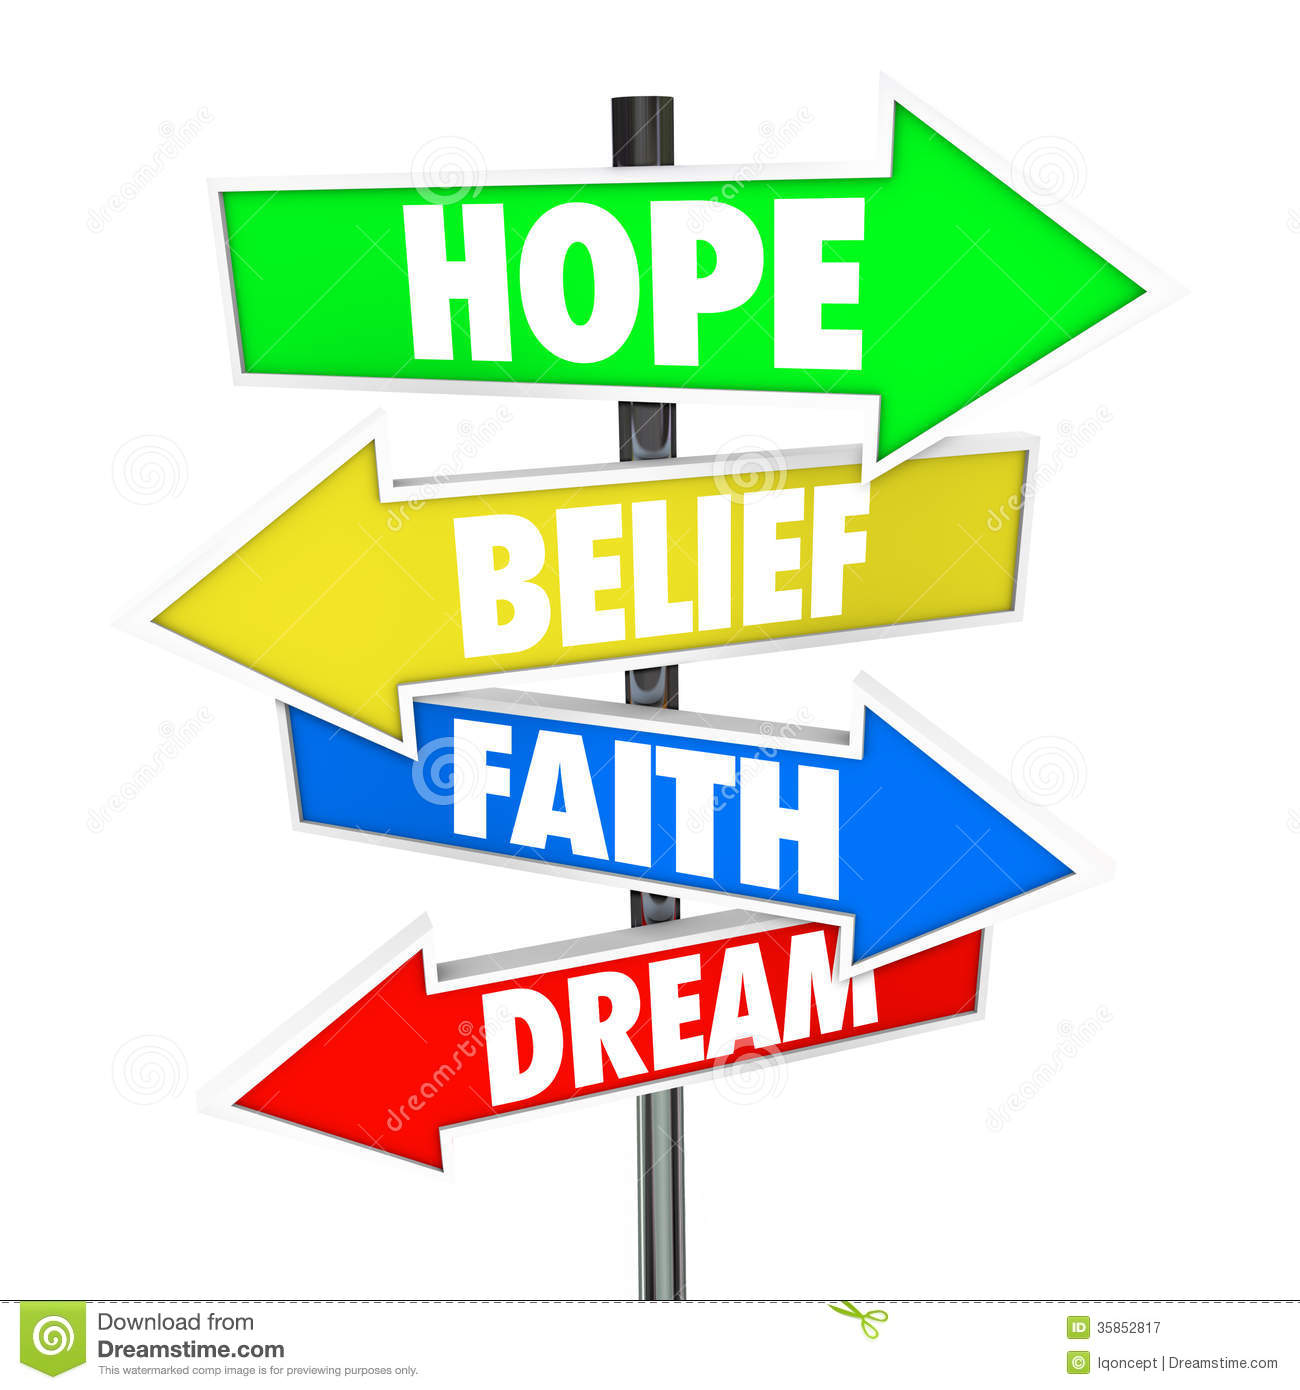 Hope Belief Faith And Dream Words On Arrow Road Signs Pointing To